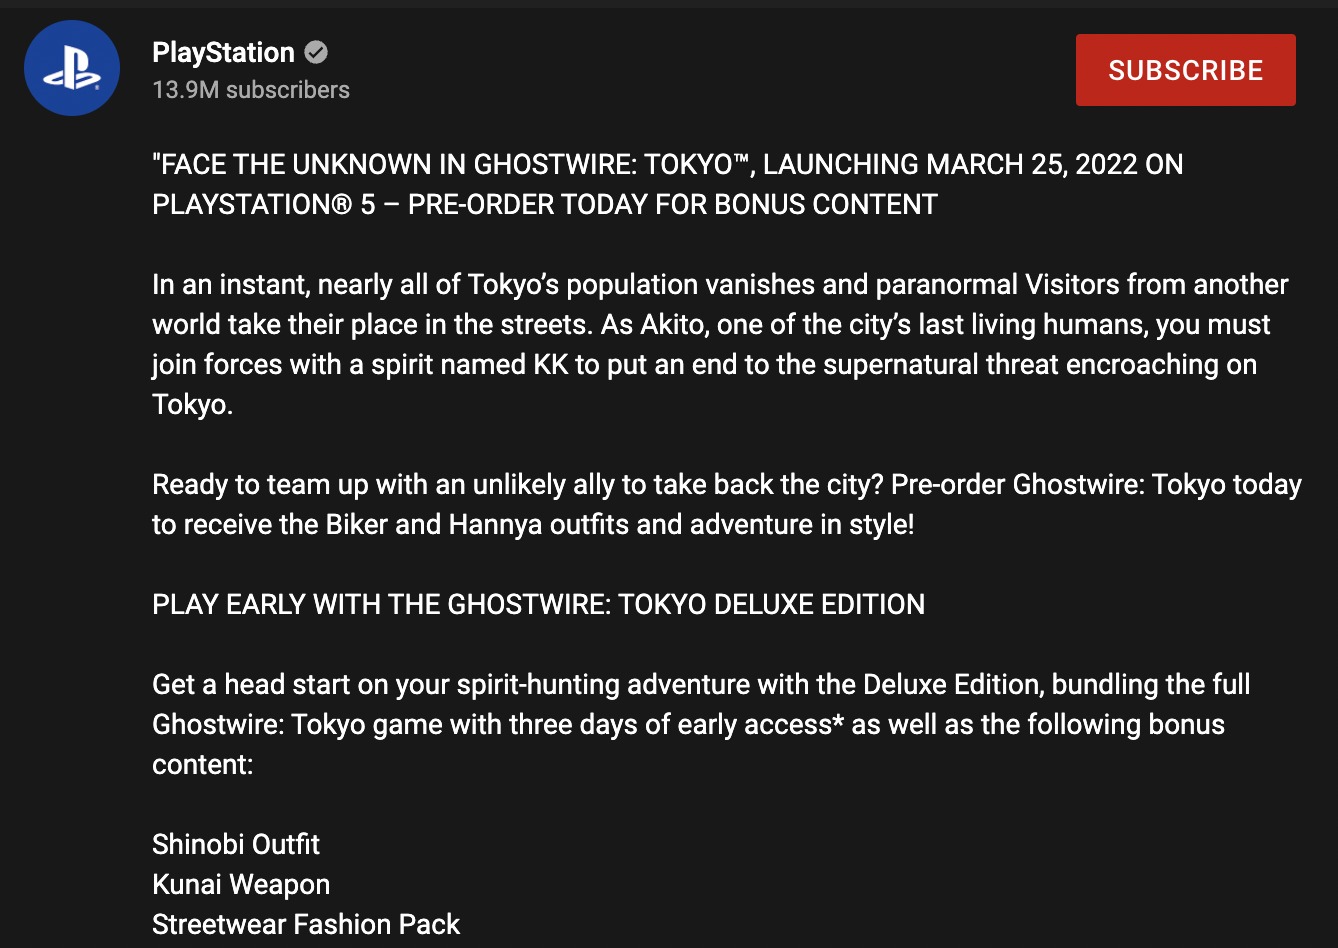 Ghostwire: Tokyo Release Date Set, Deluxe Edition and Showcase Announced